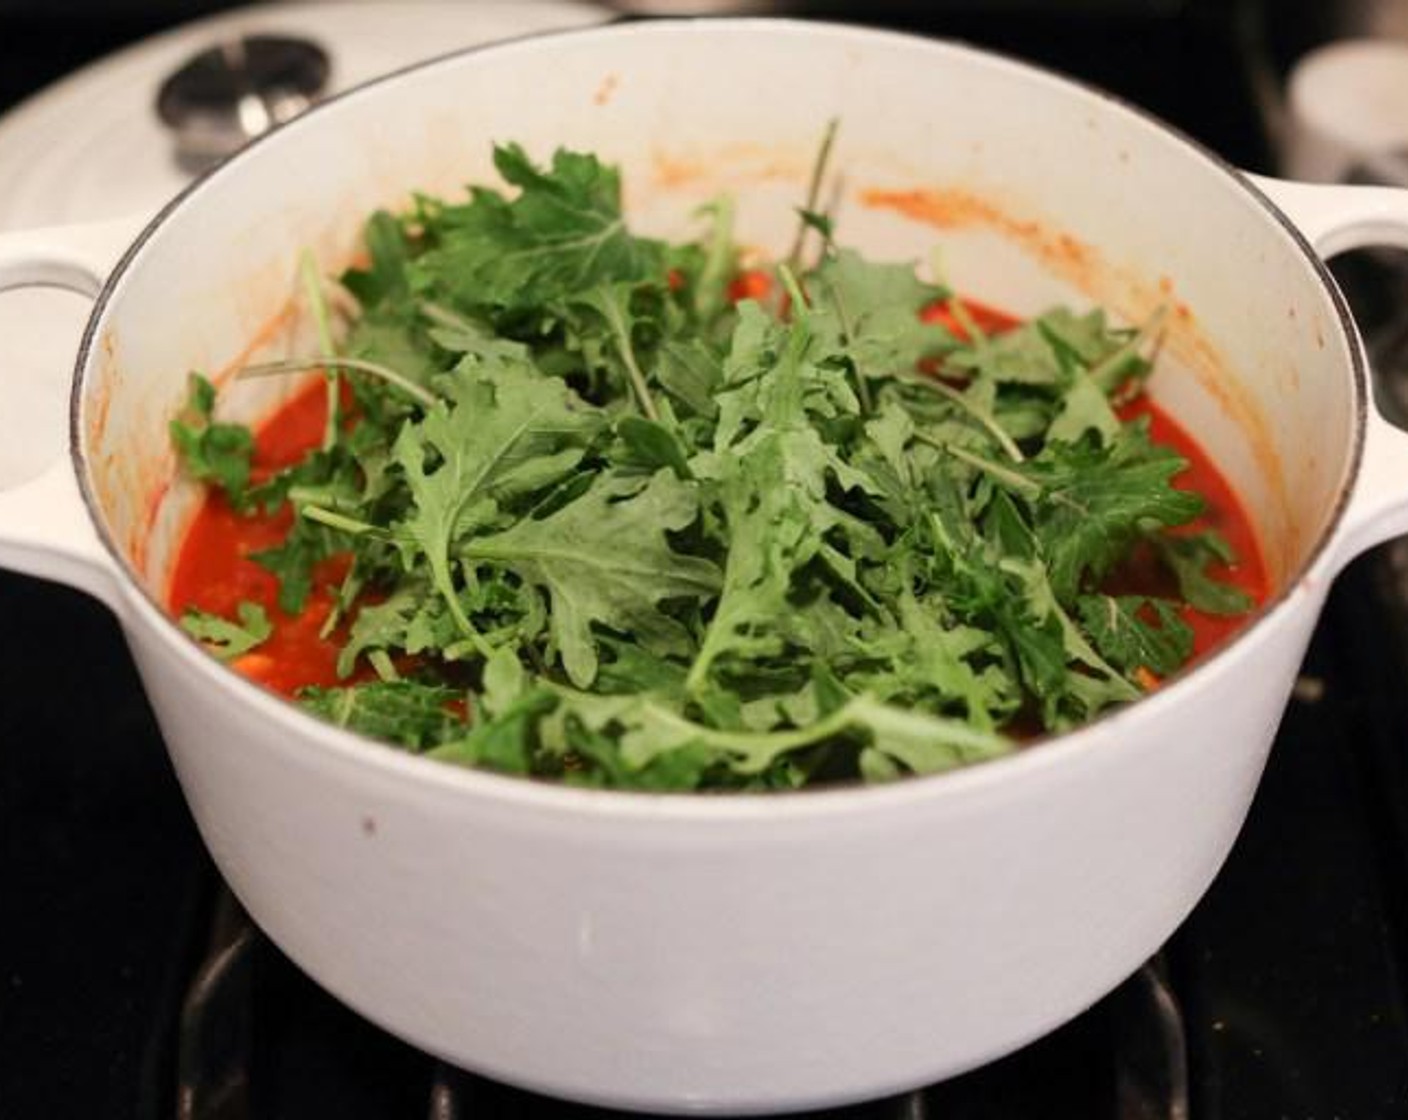 step 5 Stir in the Baby Kale (4 cups) or spinach and the Lime (1/2) and cook just until the greens have wilted. Taste and season with extra salt if necessary. Ladle the stew into bowls, garnish with Goat Cheese (4 Tbsp), Fresh Cilantro (to taste), and Tortilla Chips (to taste).